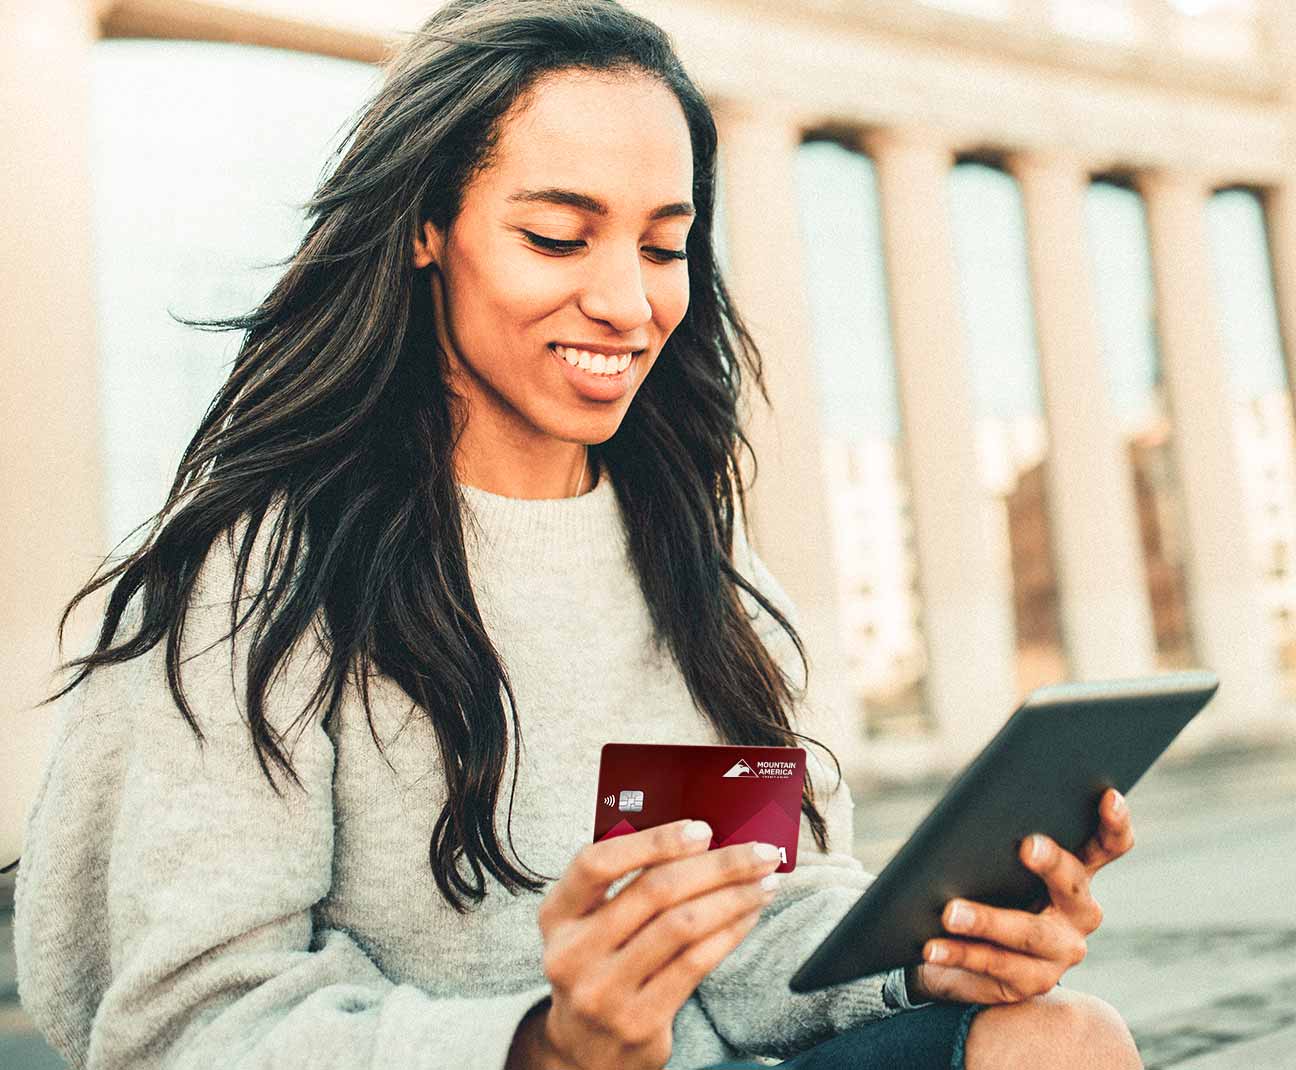 Woman holding a red credit card and tablet computer